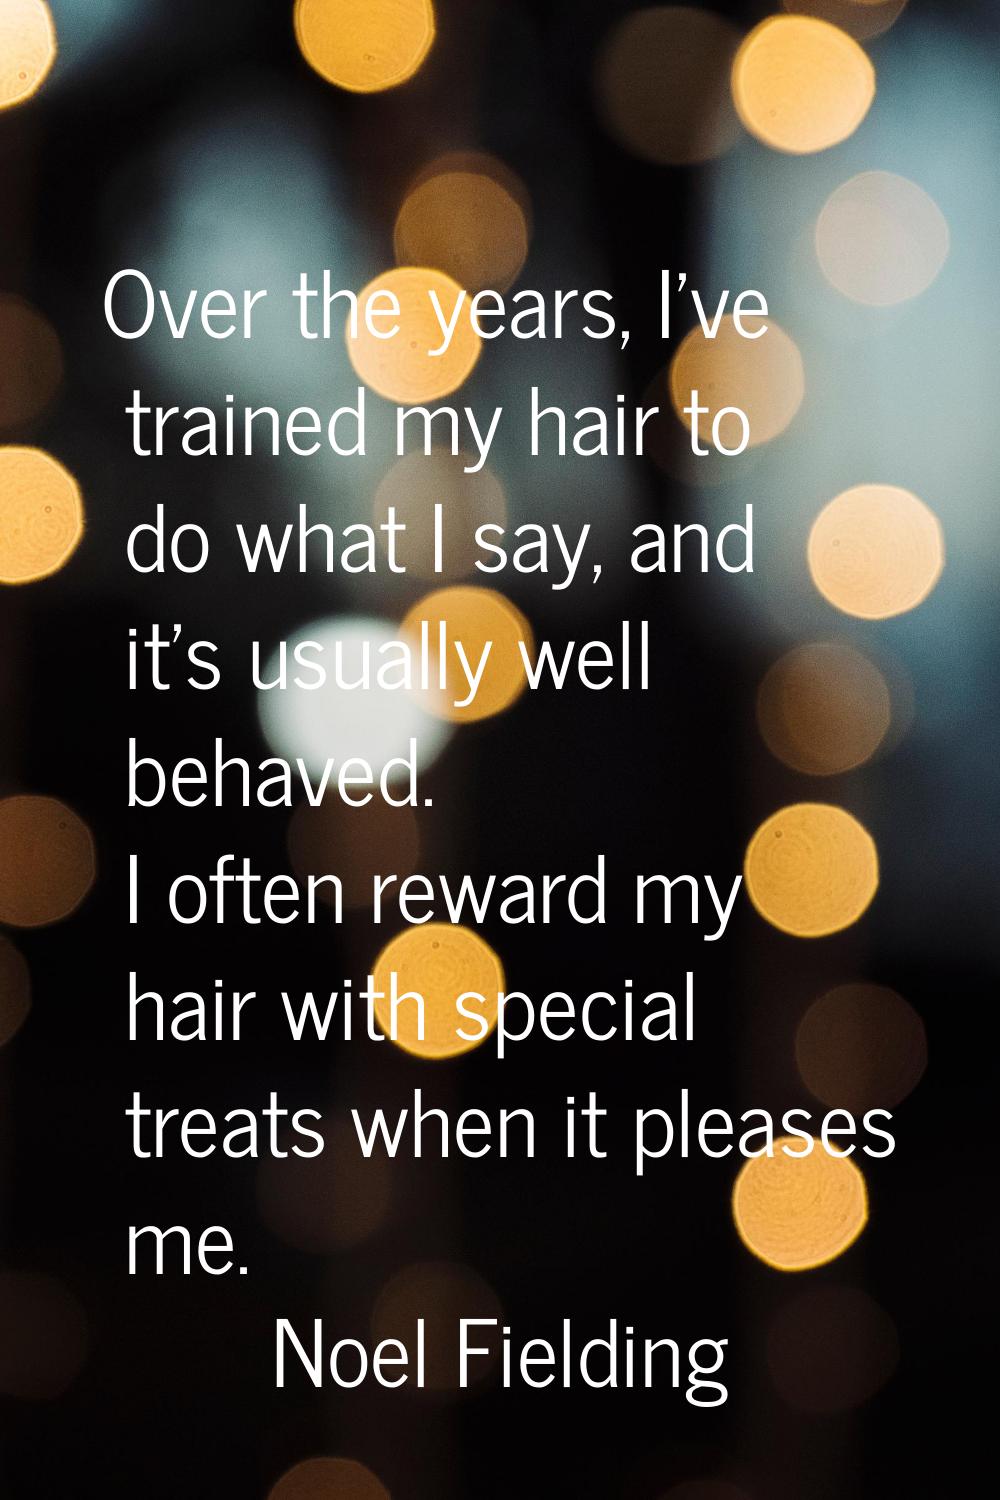 Over the years, I've trained my hair to do what I say, and it's usually well behaved. I often rewar